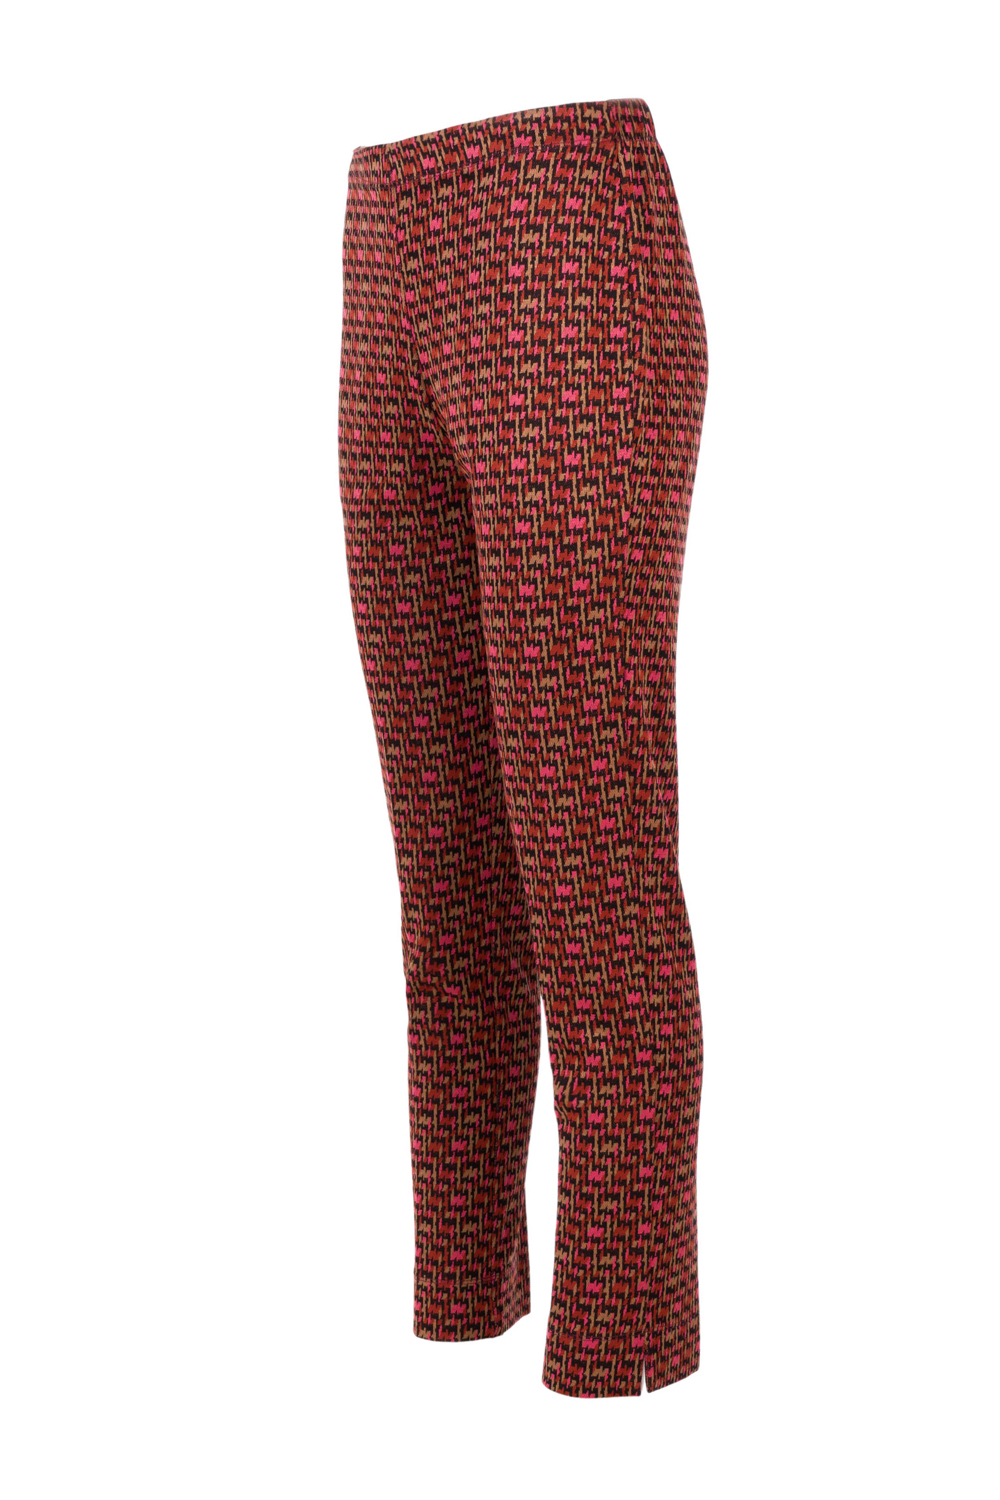 Jersey “Pied de Coq” Printed Trousers with Elasticated Waistband (Maria Bellentani)